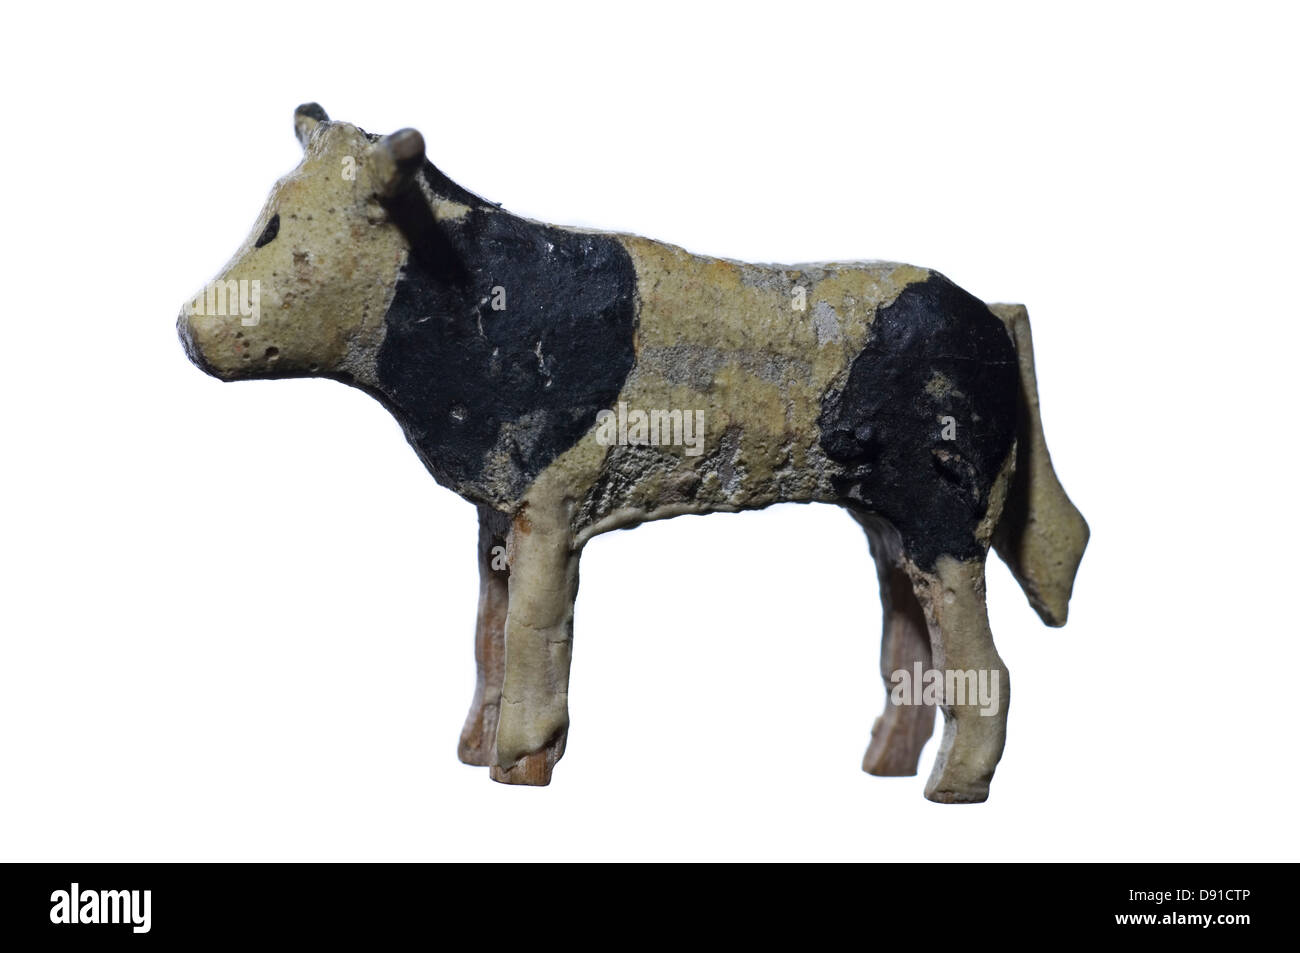 Figurine of cow against white background Stock Photo